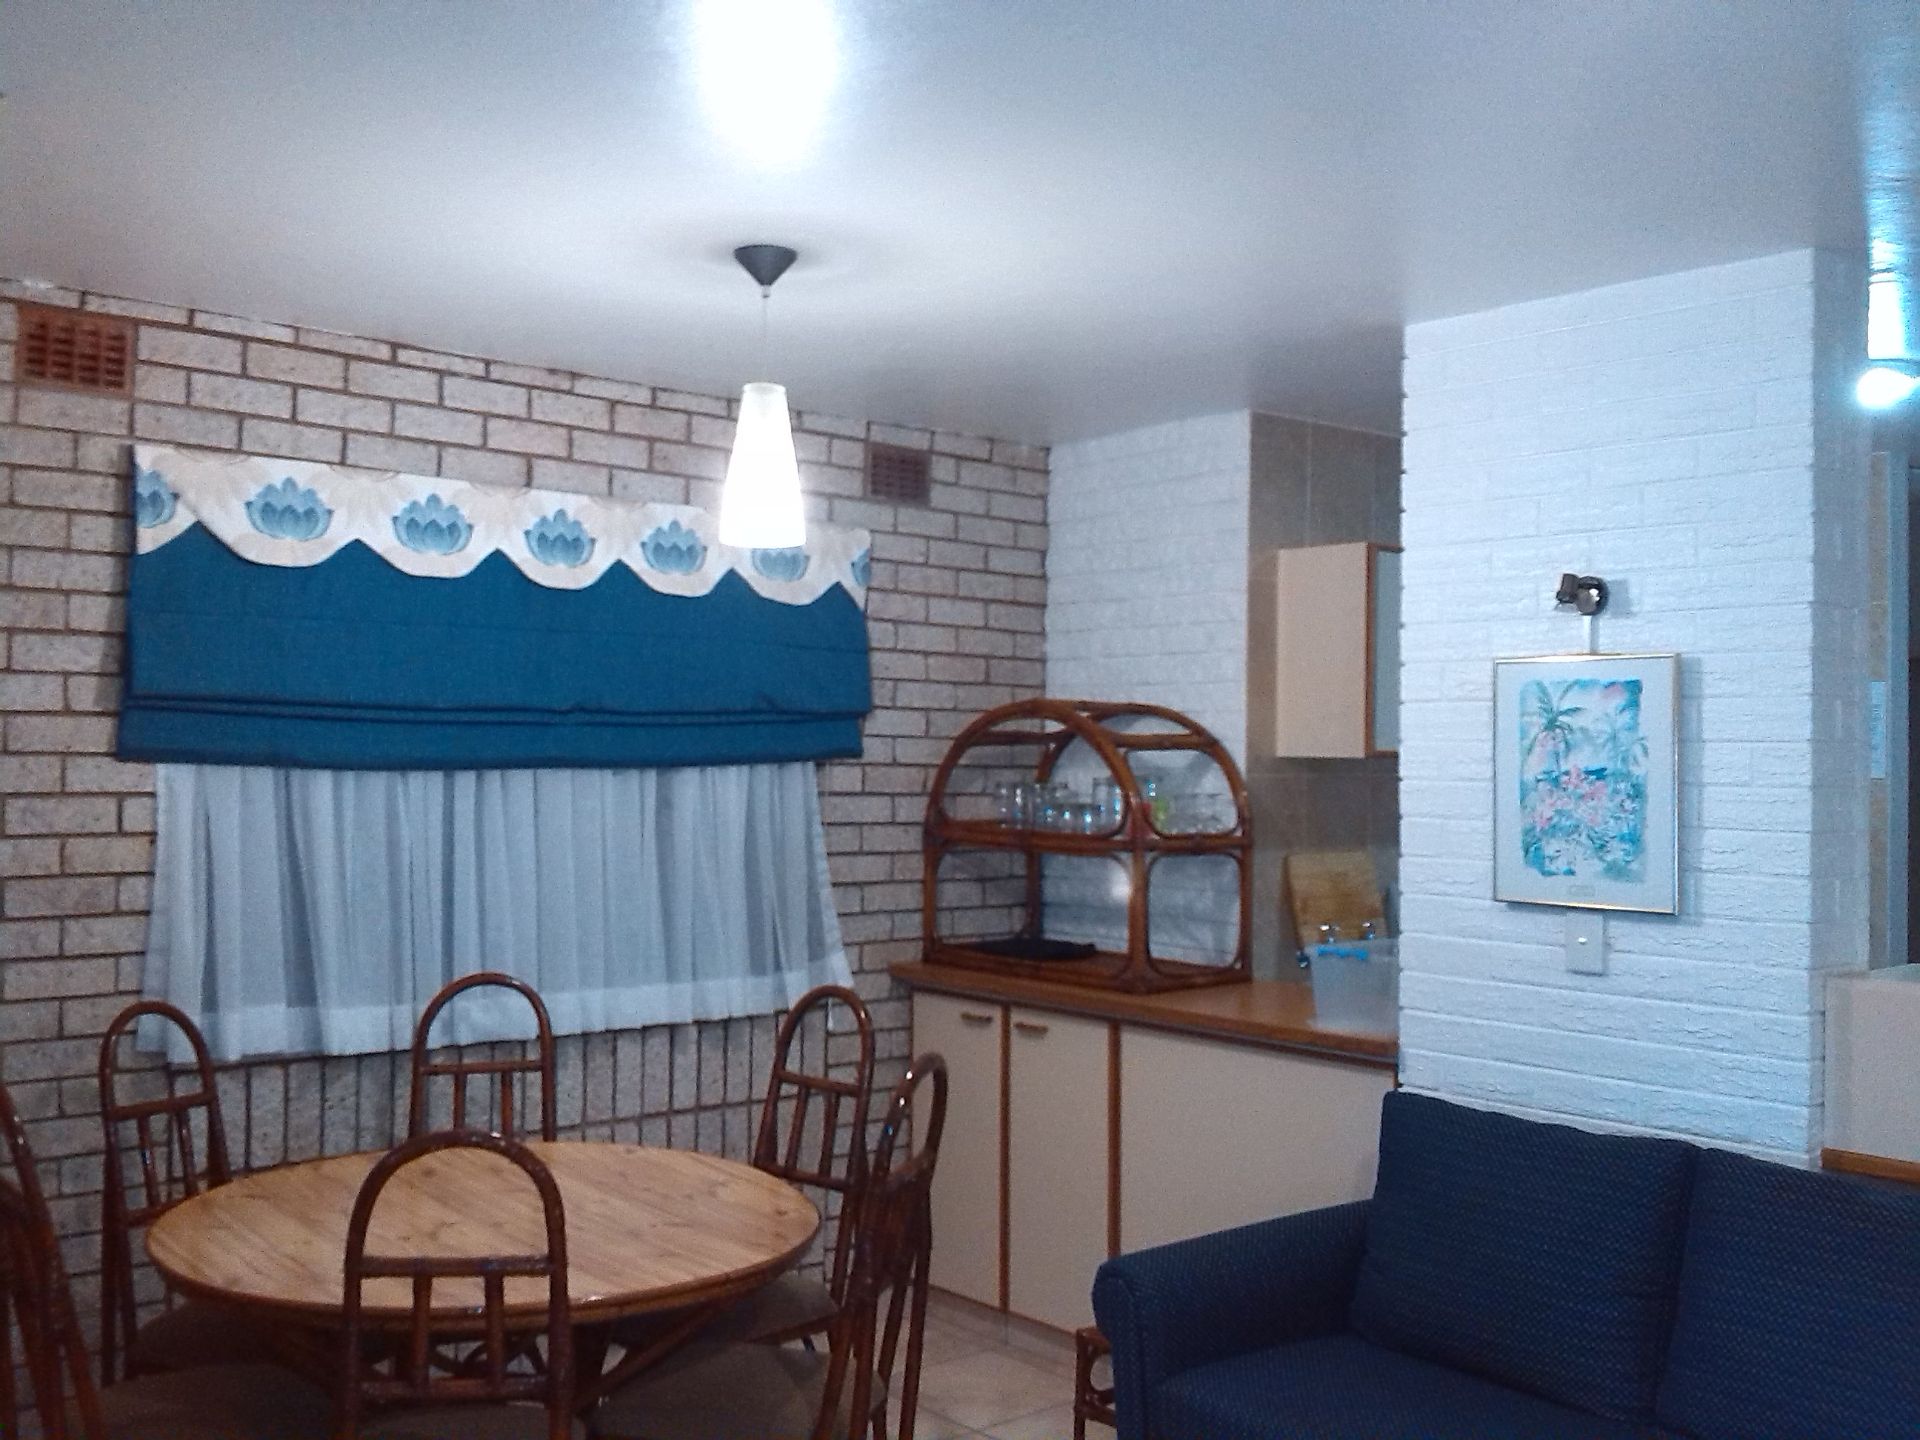 Pearly Shells - 2 Beds (6 Sleepers Max) . Date - 06/05/2016 - 13/05/2016 - (Shareblock) - Image 14 of 32